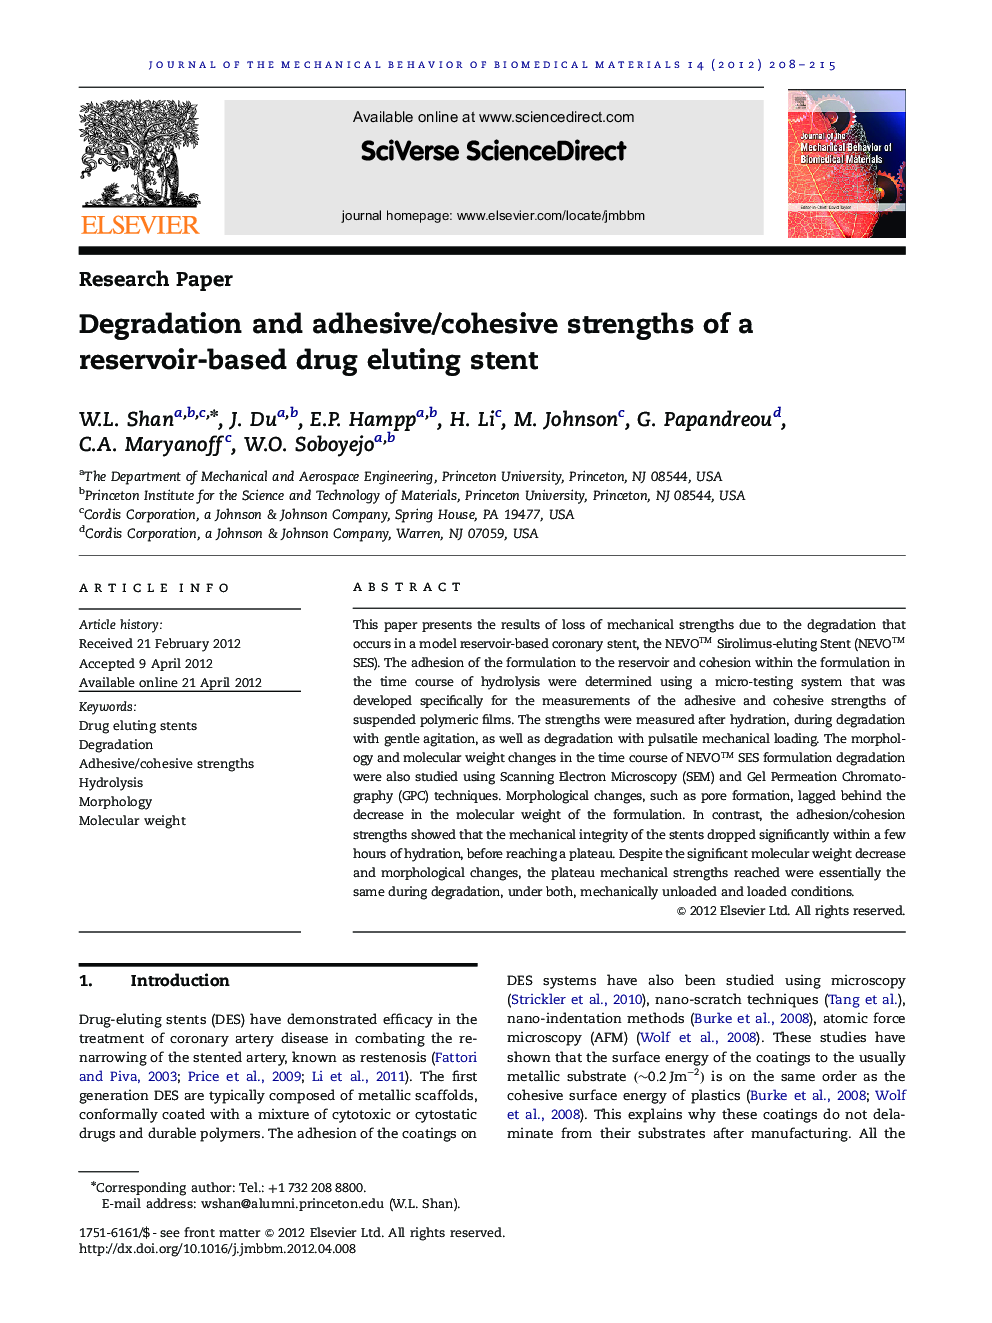 Degradation and adhesive/cohesive strengths of a reservoir-based drug eluting stent